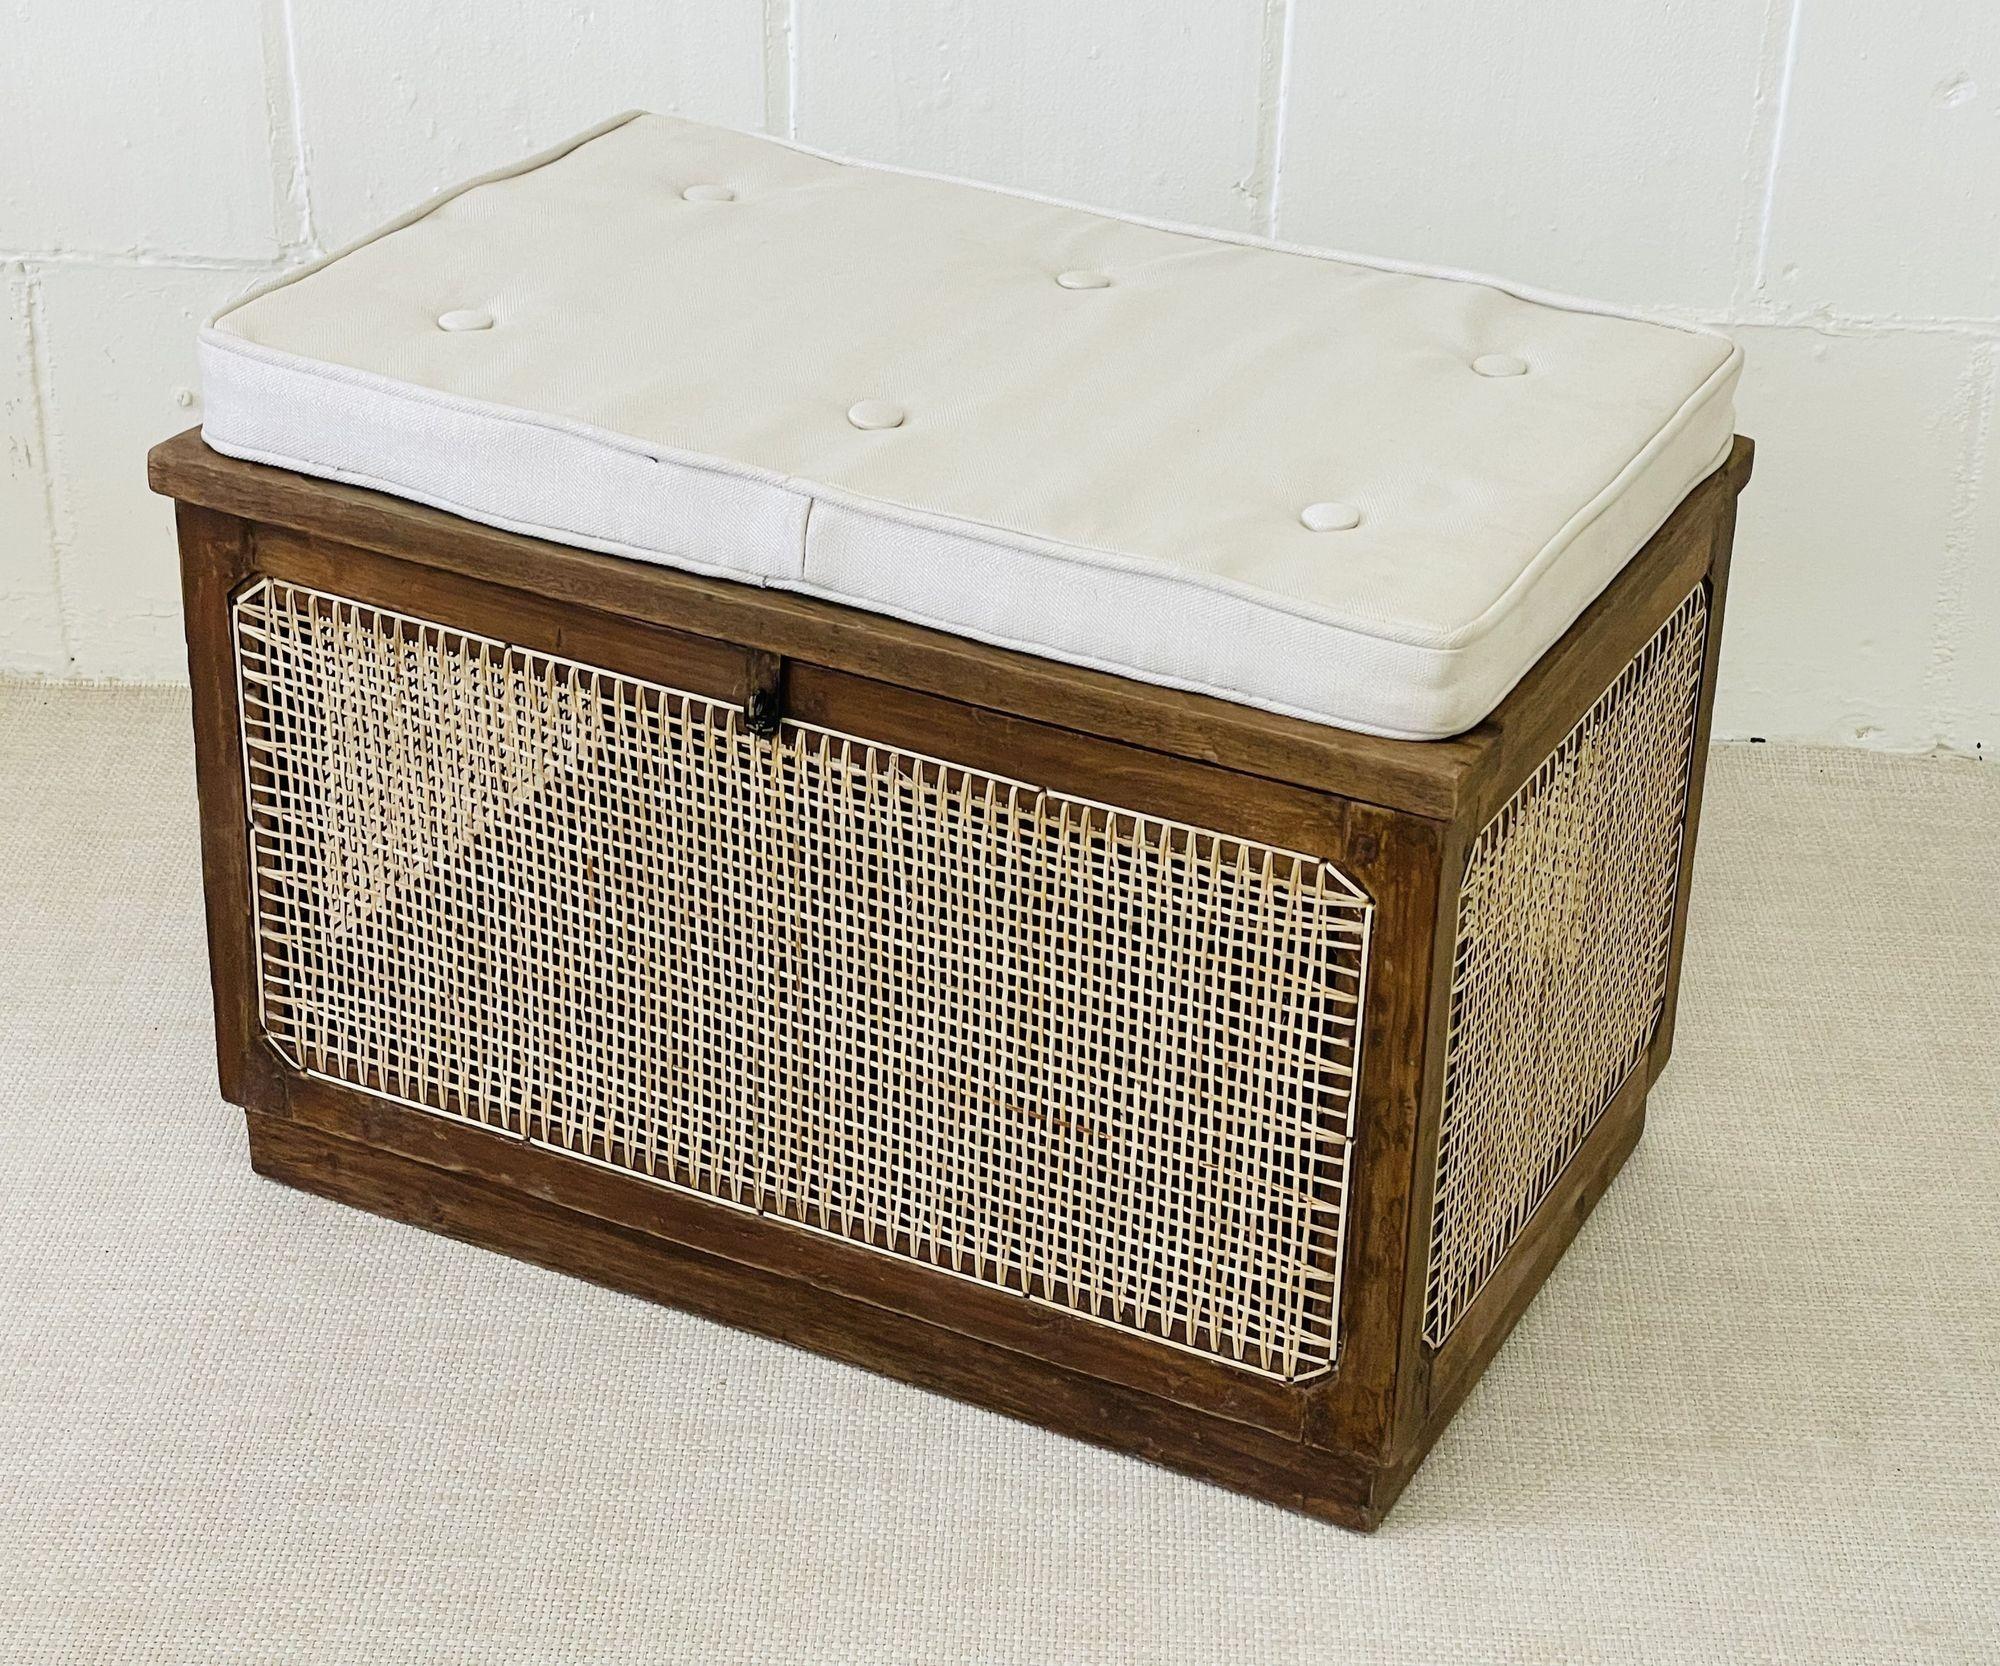 'Dirty Linen' Basket with Cushion/Bench Top attributed to Pierre Jeanneret
 
France, India, 1960s
 
Provenance: M.L.A Flats Building in Chandigarh, India
 
With markings indicating provenance - This is directly from Chandigarh, India. This box has